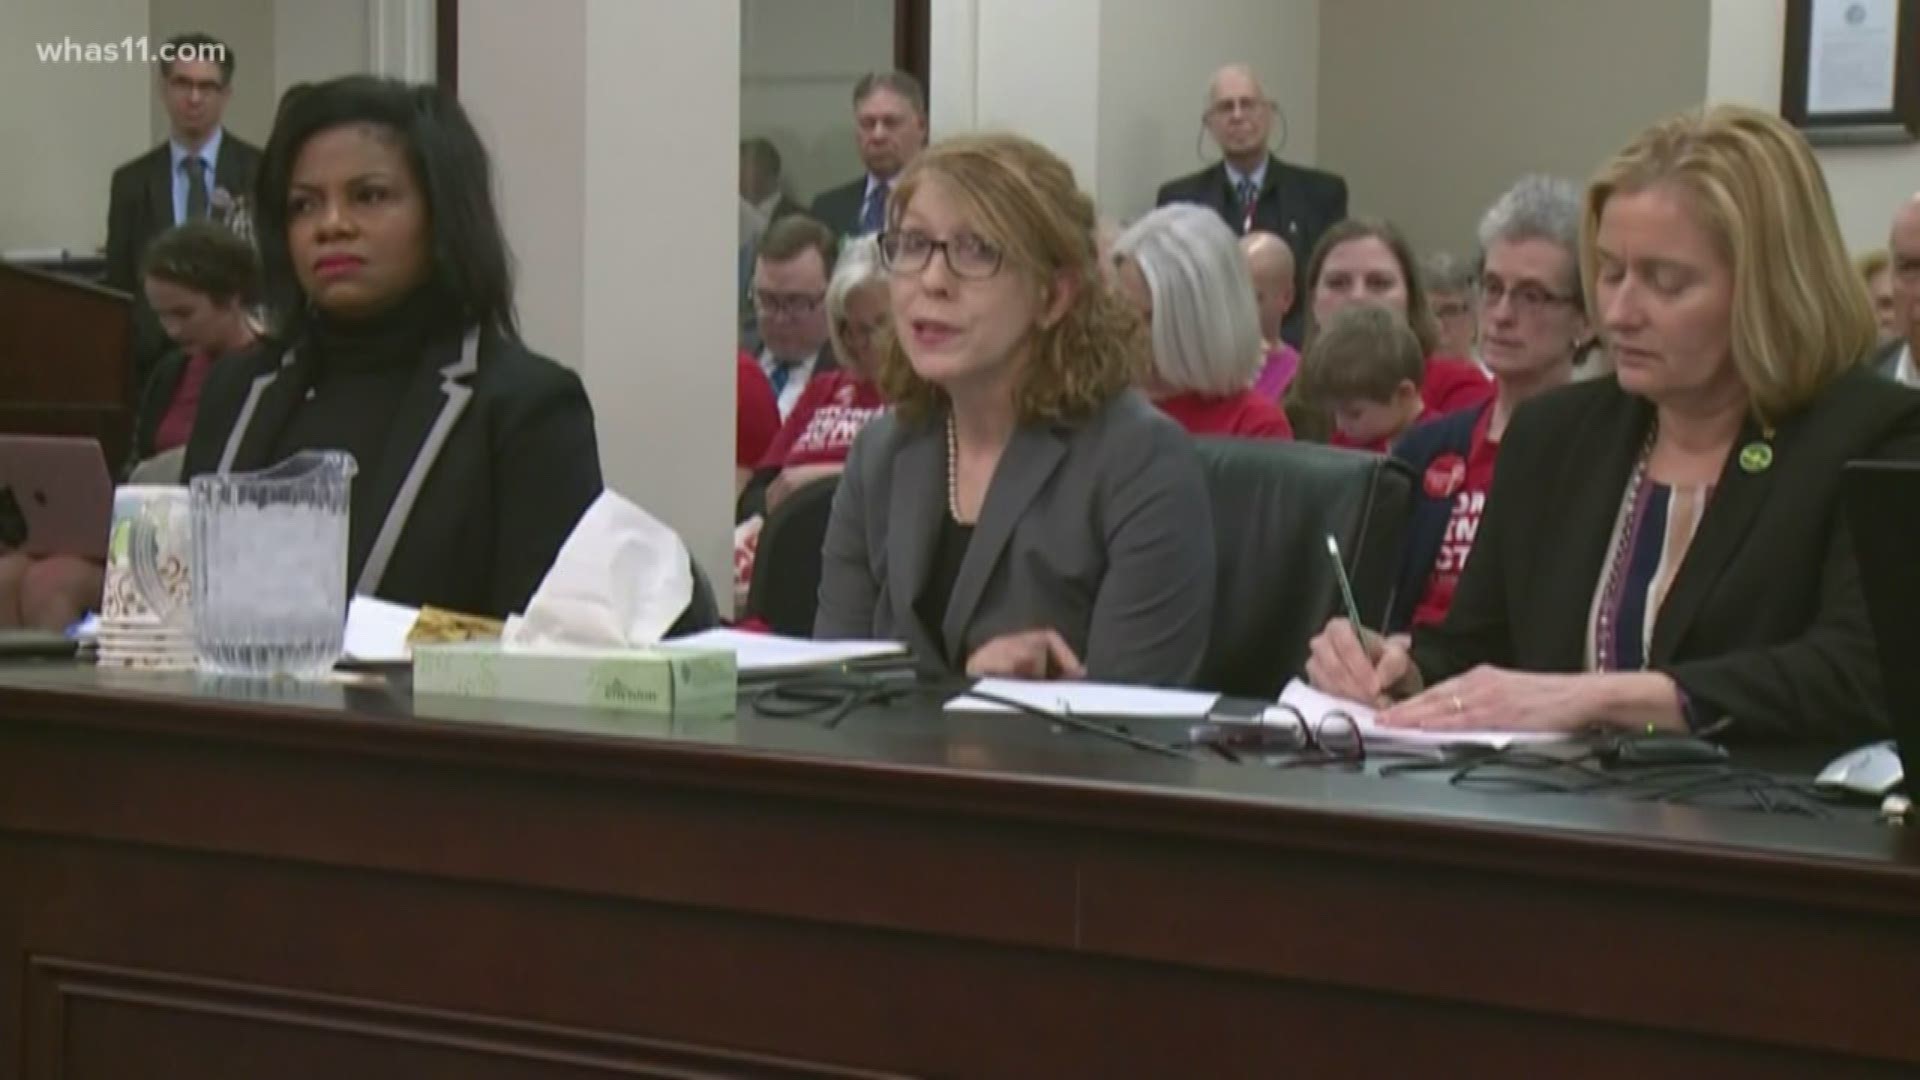 Race, gender and disability were at the focus of a passionate debate over abortion in Kentucky.